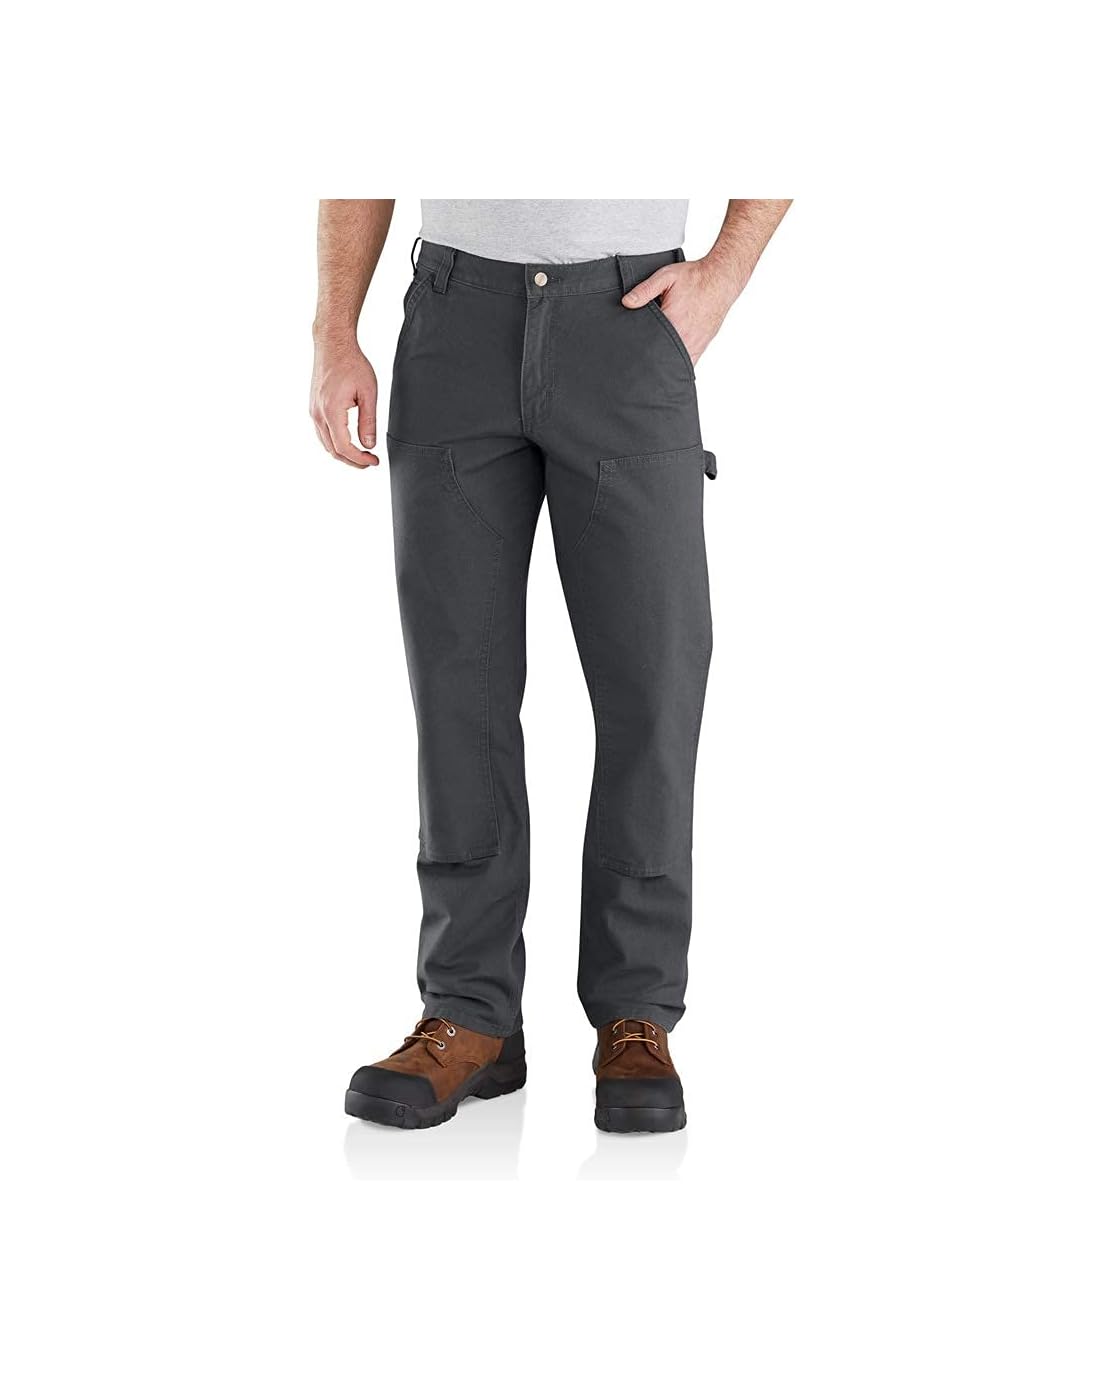 Carhartt Mens Rugged Flex Relaxed Fit Pant